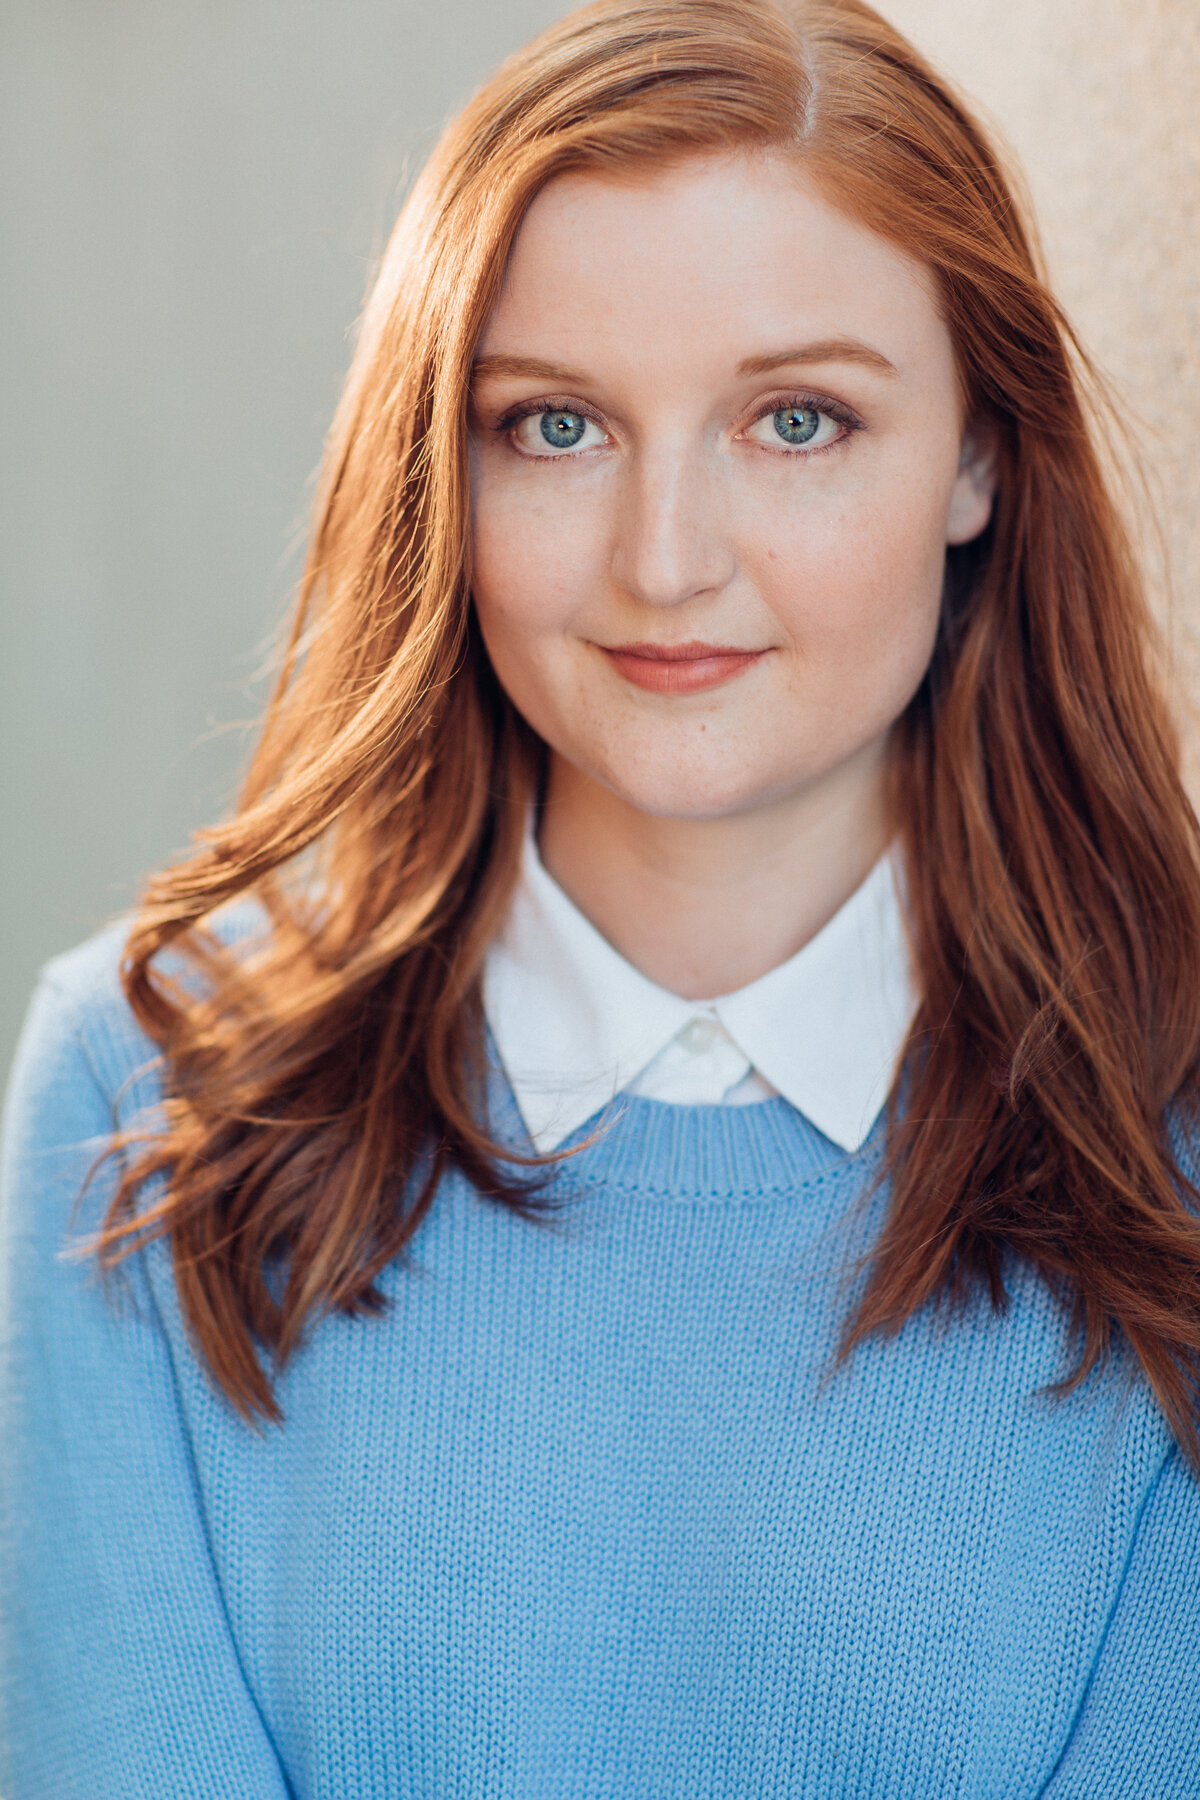 Headshot Photograph Of Young Woman In Light Blue Long Sleeves Los Angeles